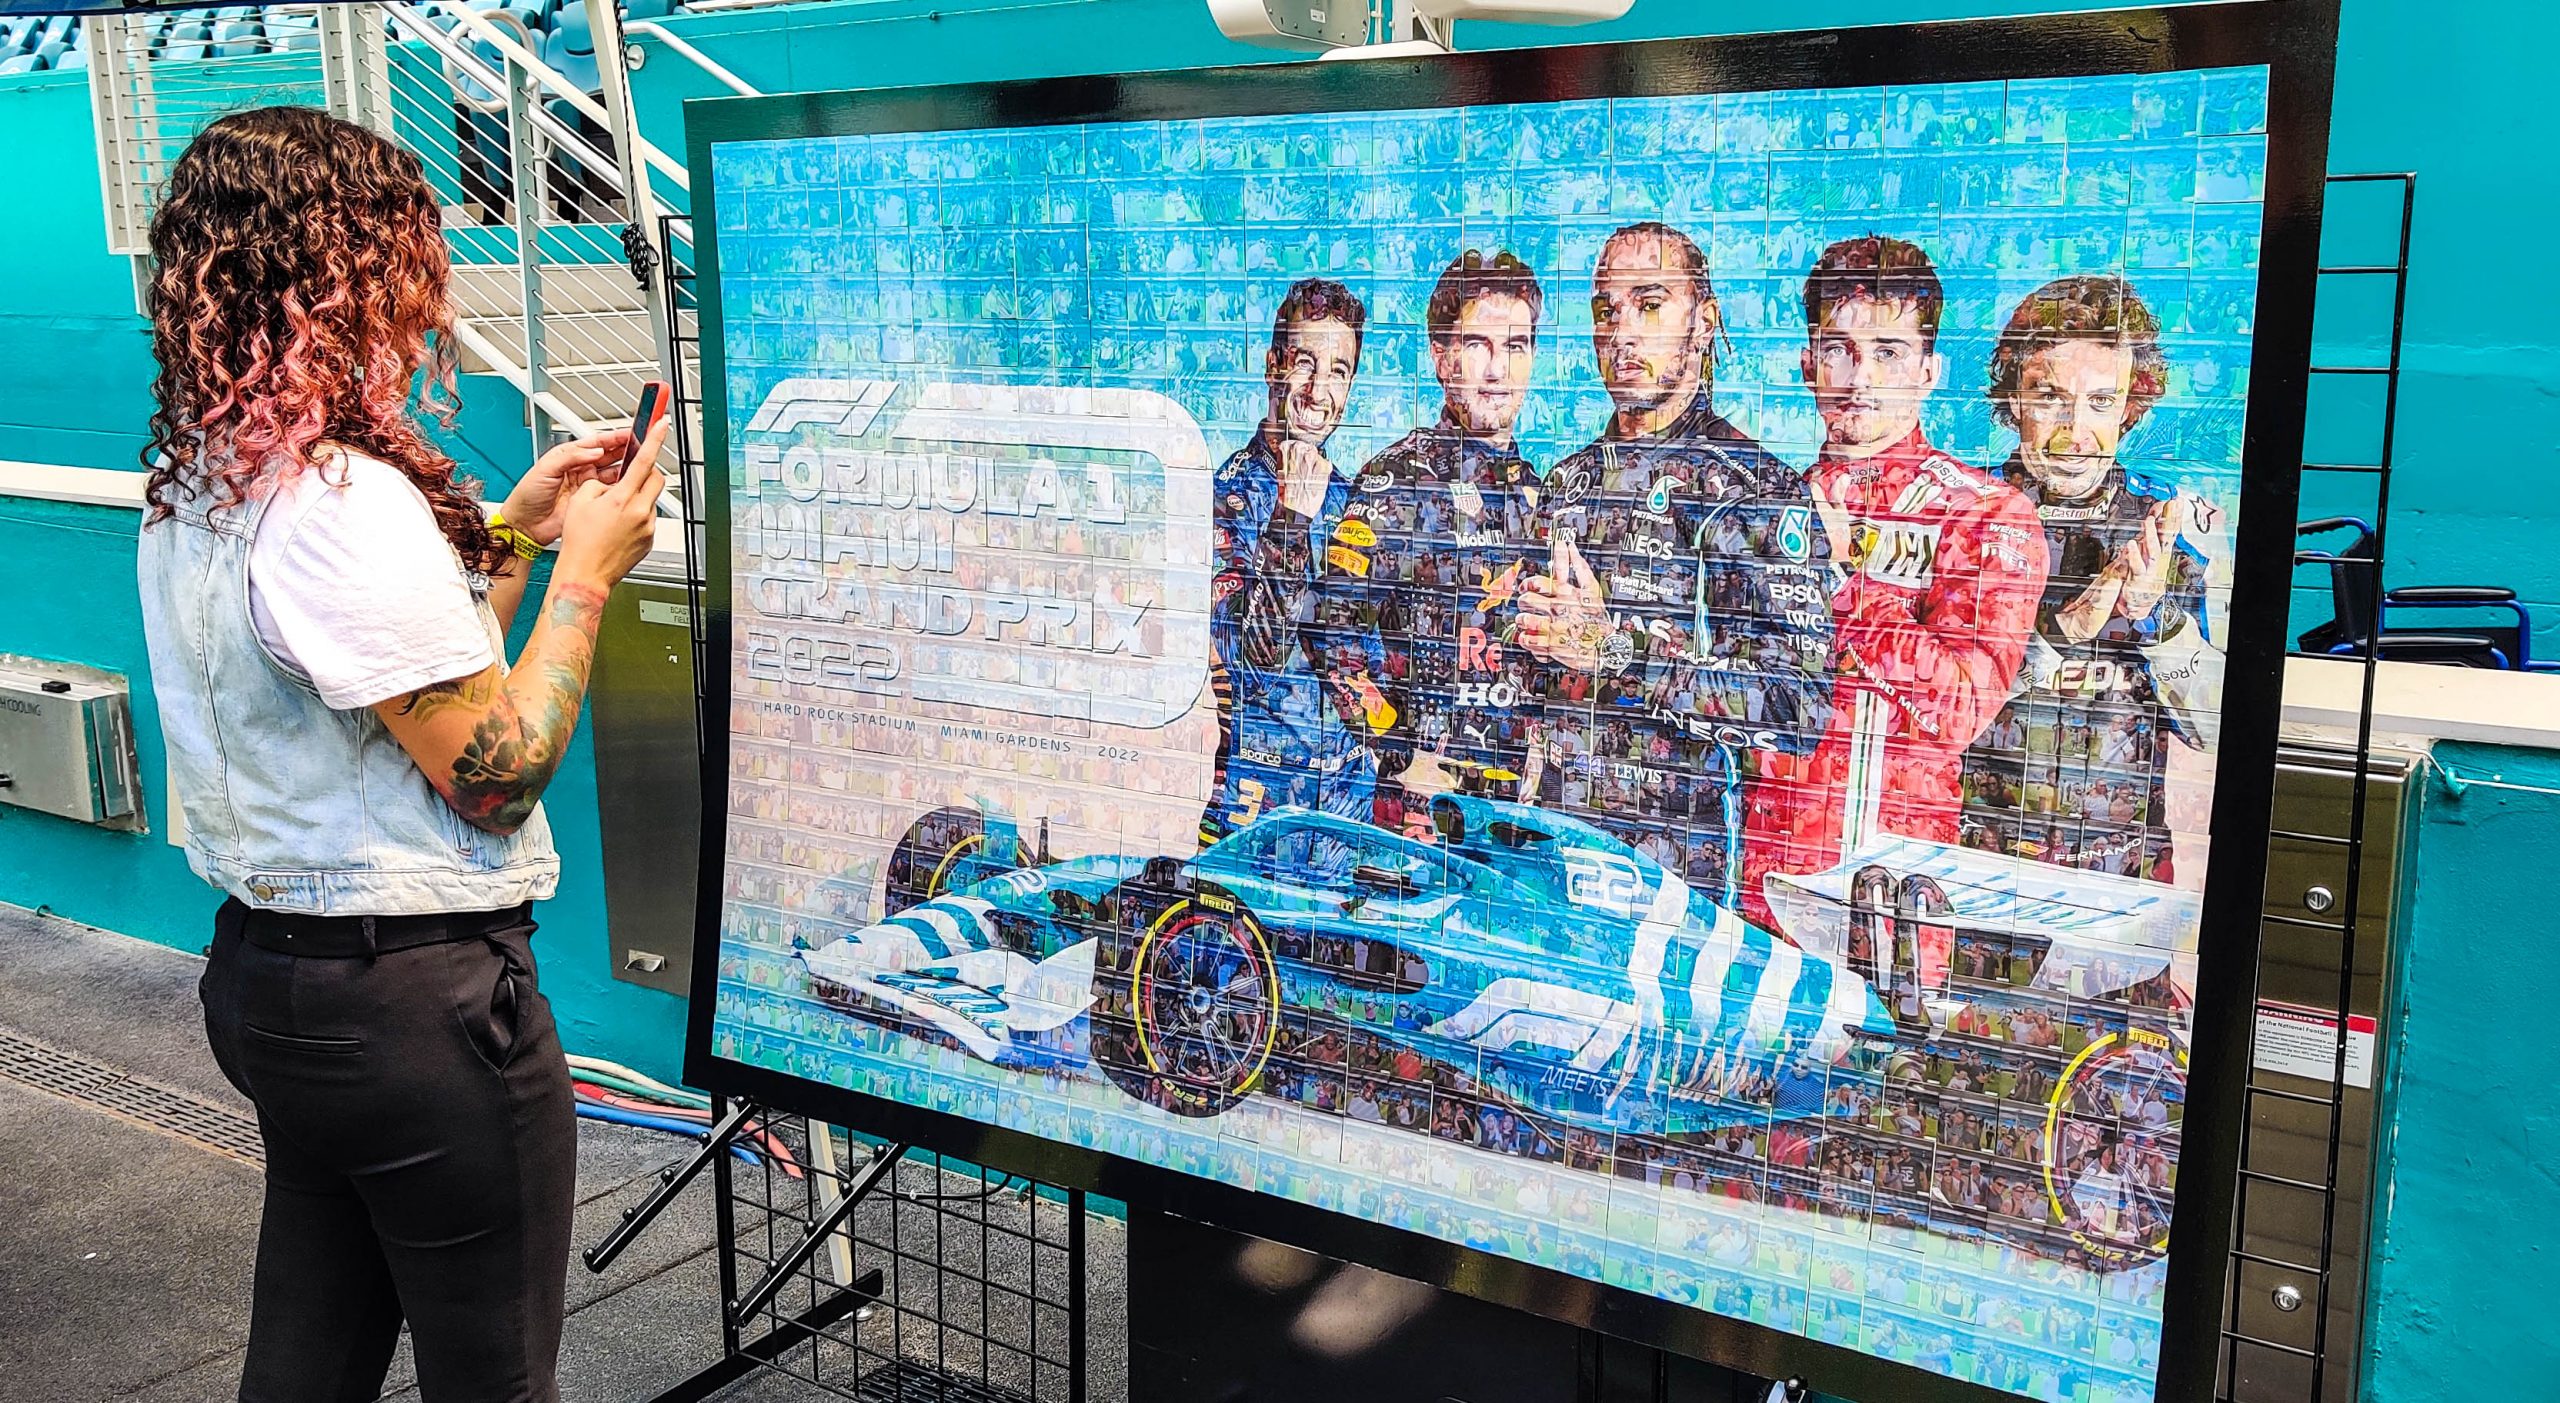 Formula 1 watch party hosted by Hard Rock Stadium Miami